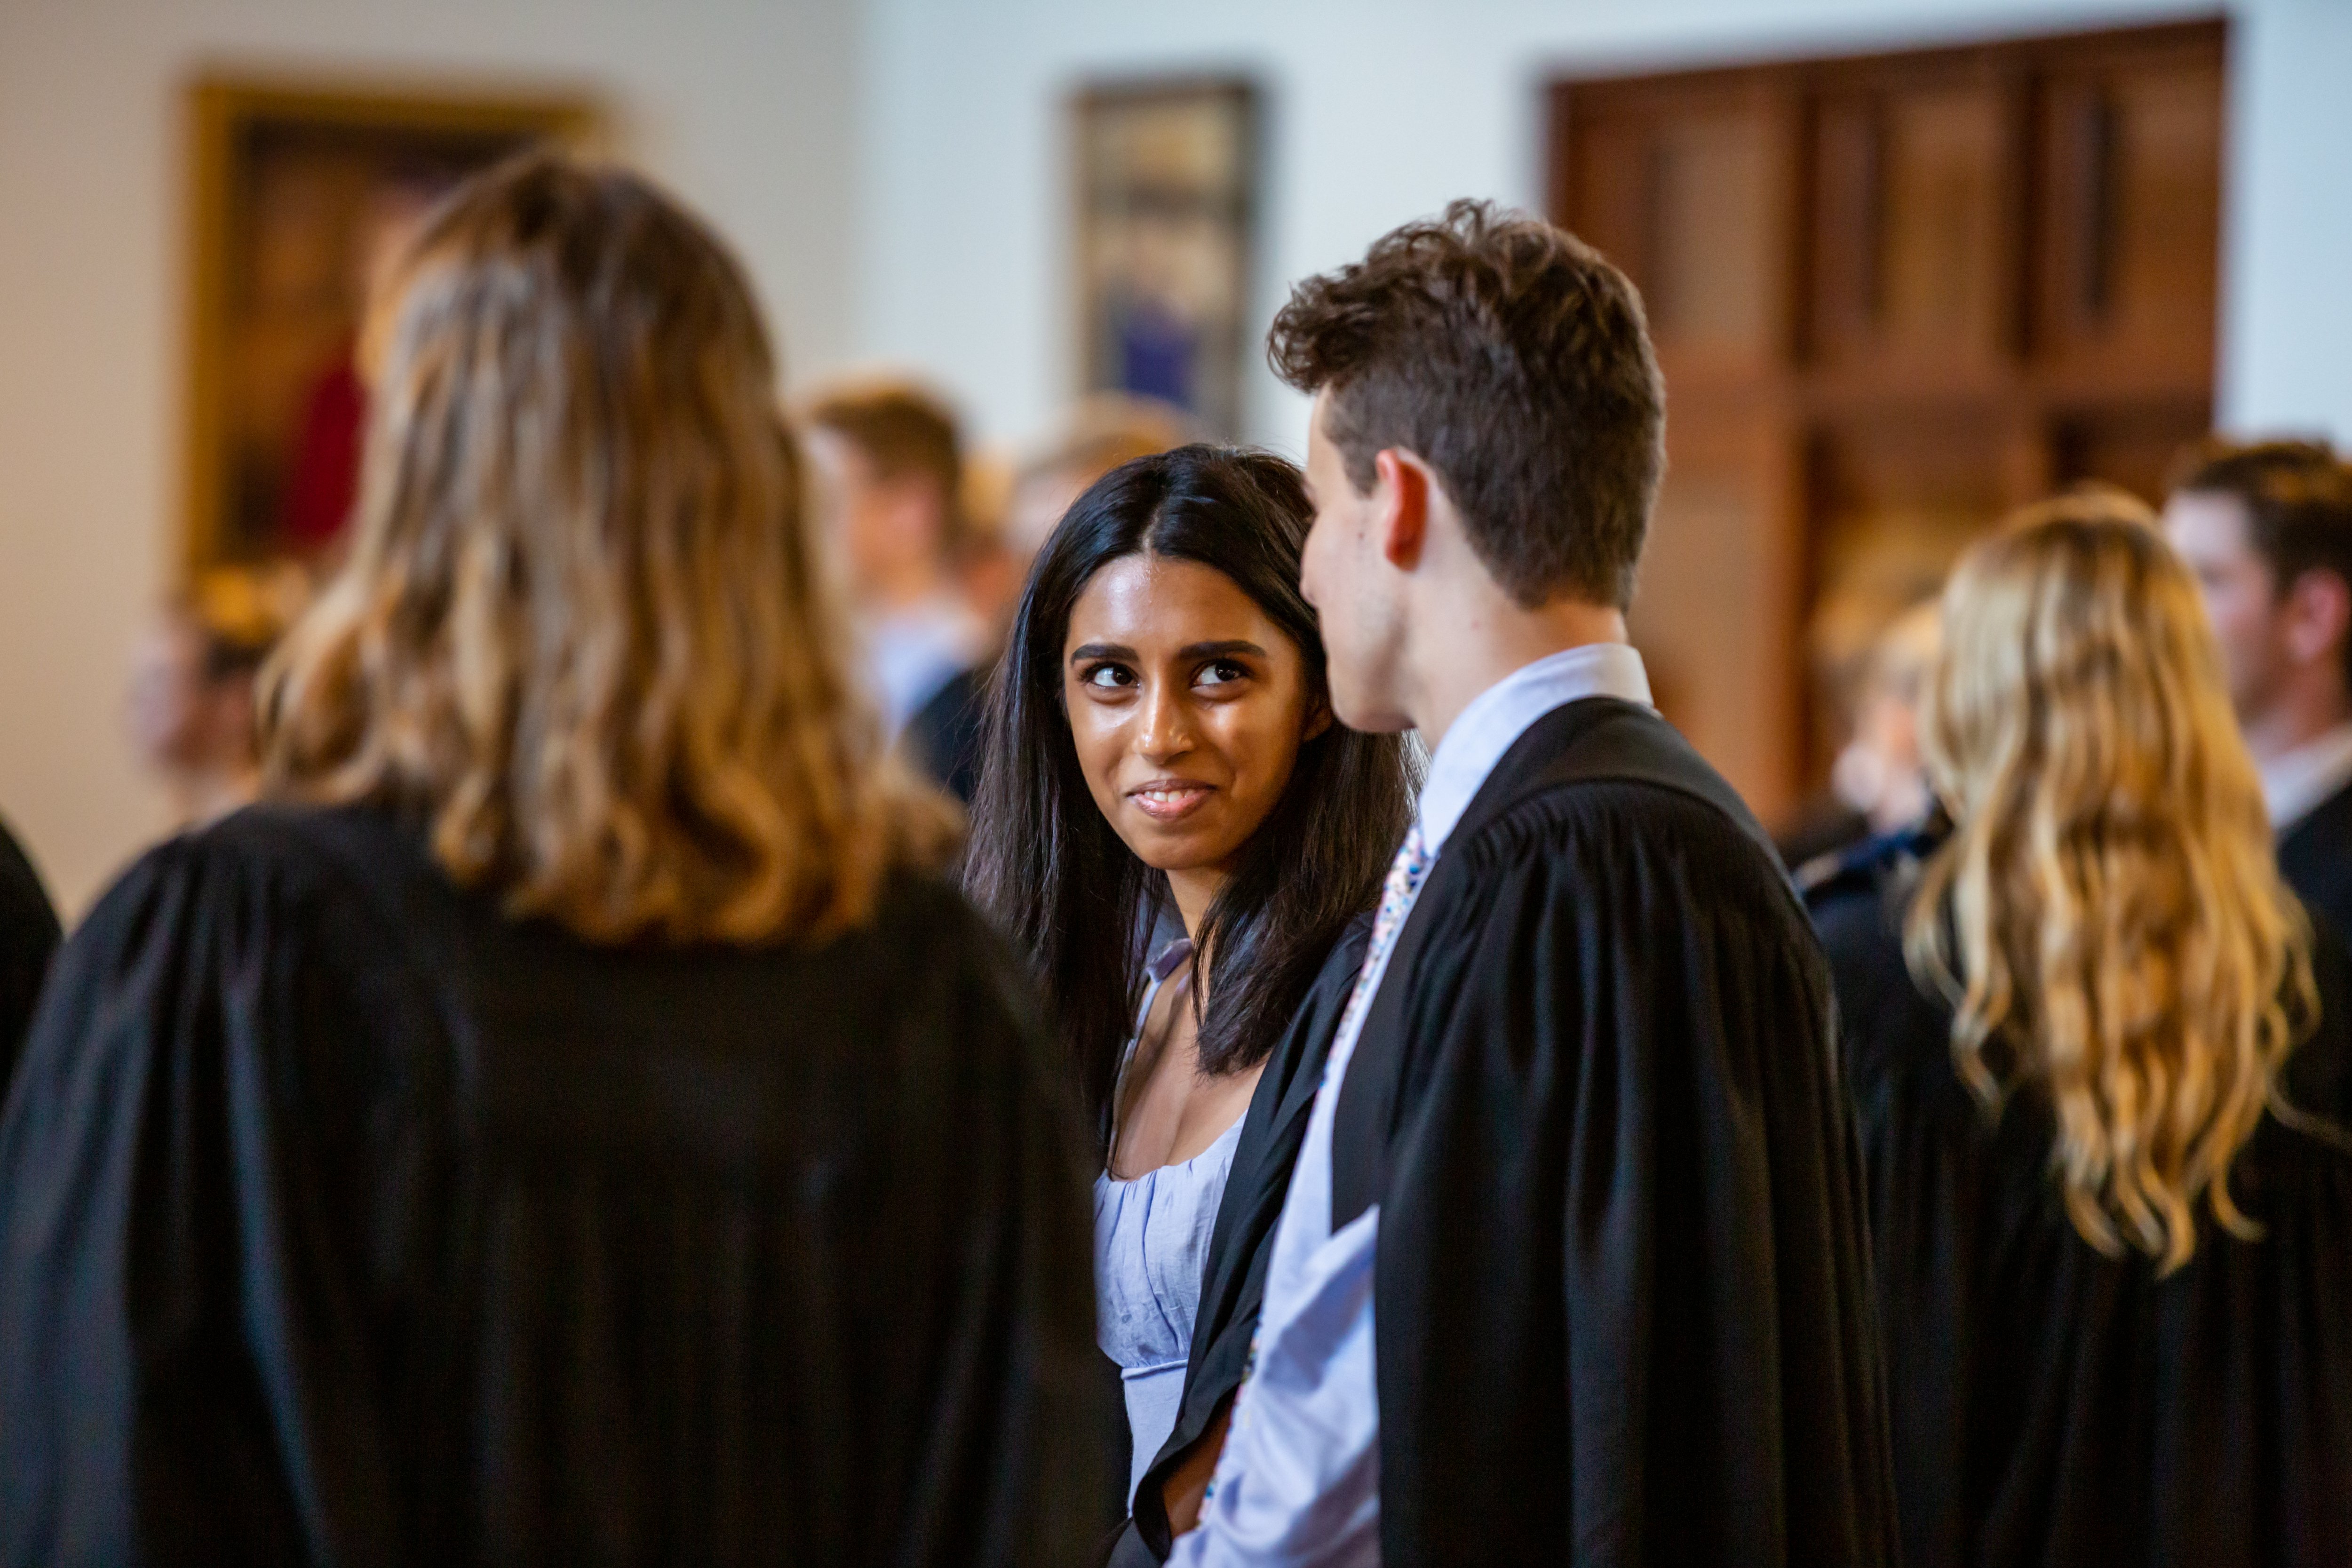 Students in robes at a St John's College formal dinner